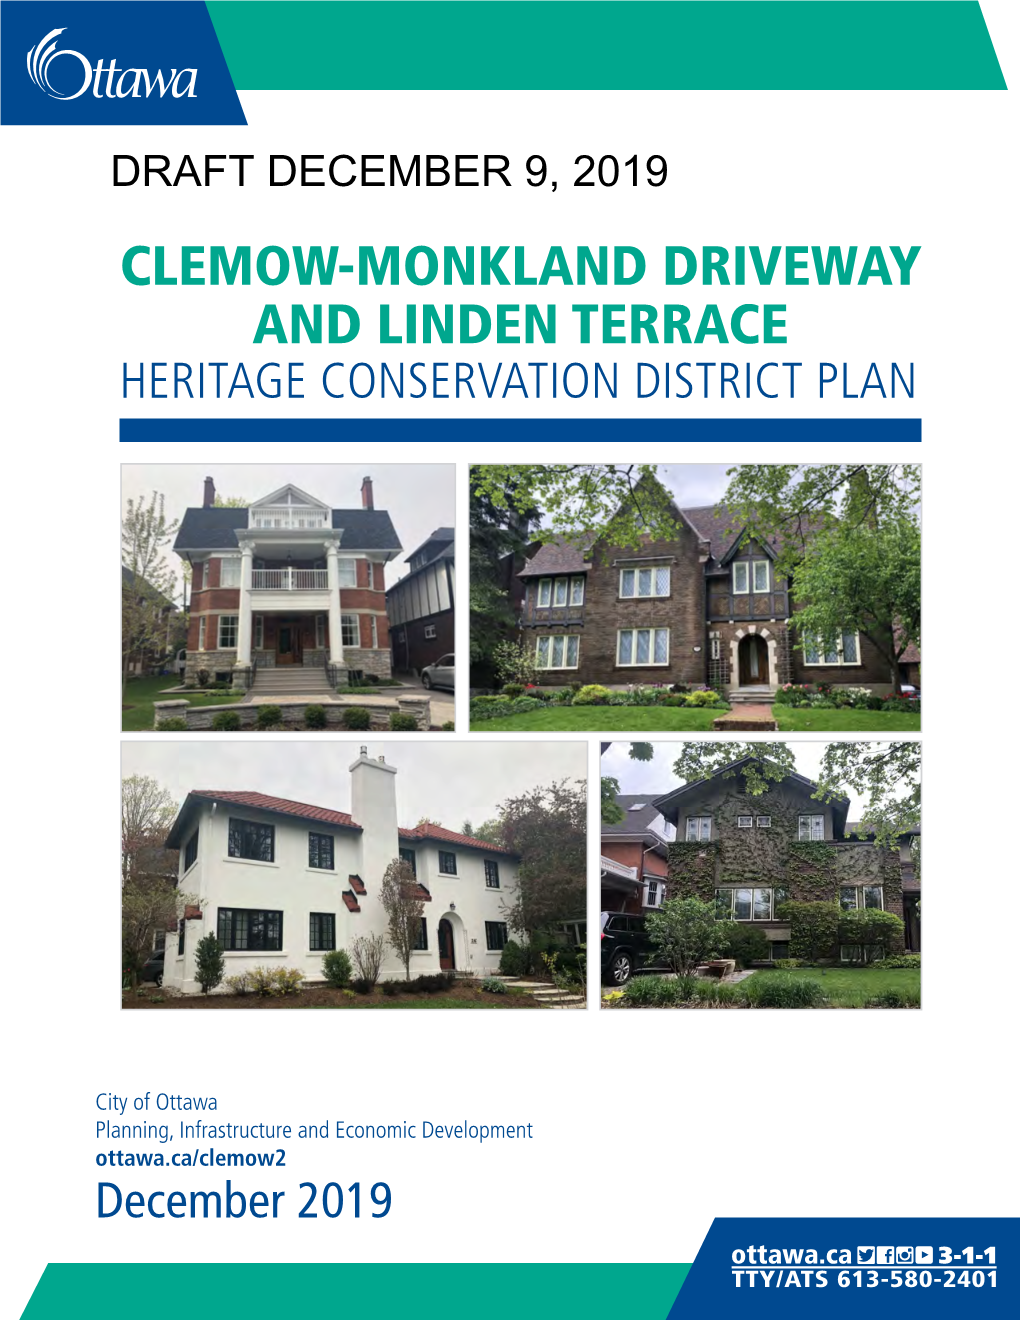 Clemow-Monkland Driveway and Linden Terrace Heritage Conservation District Plan